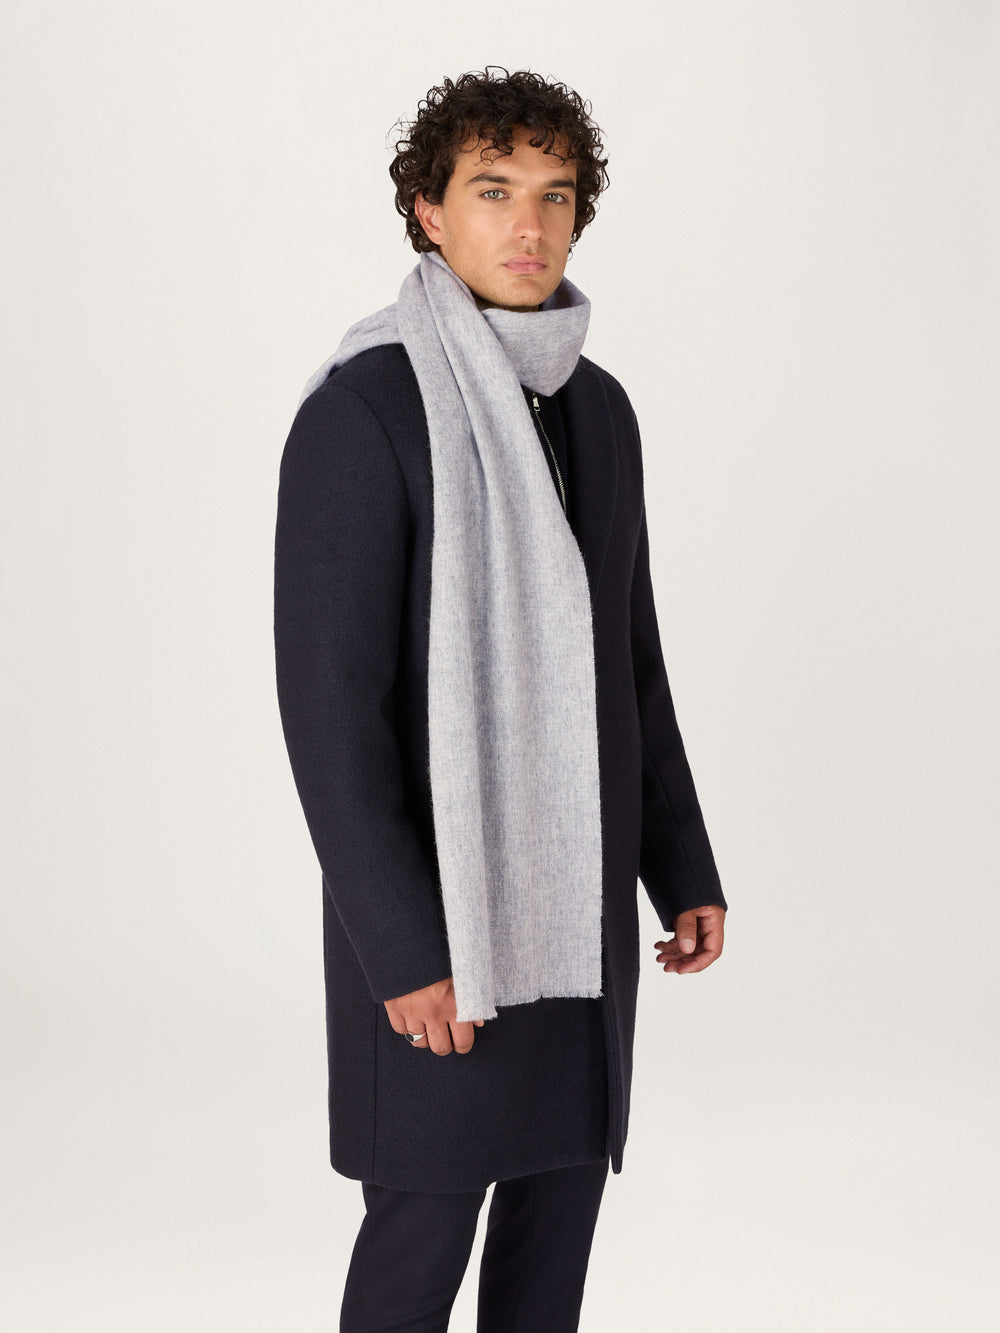 The Signature Scarf || Light Grey | Wool Cashmere